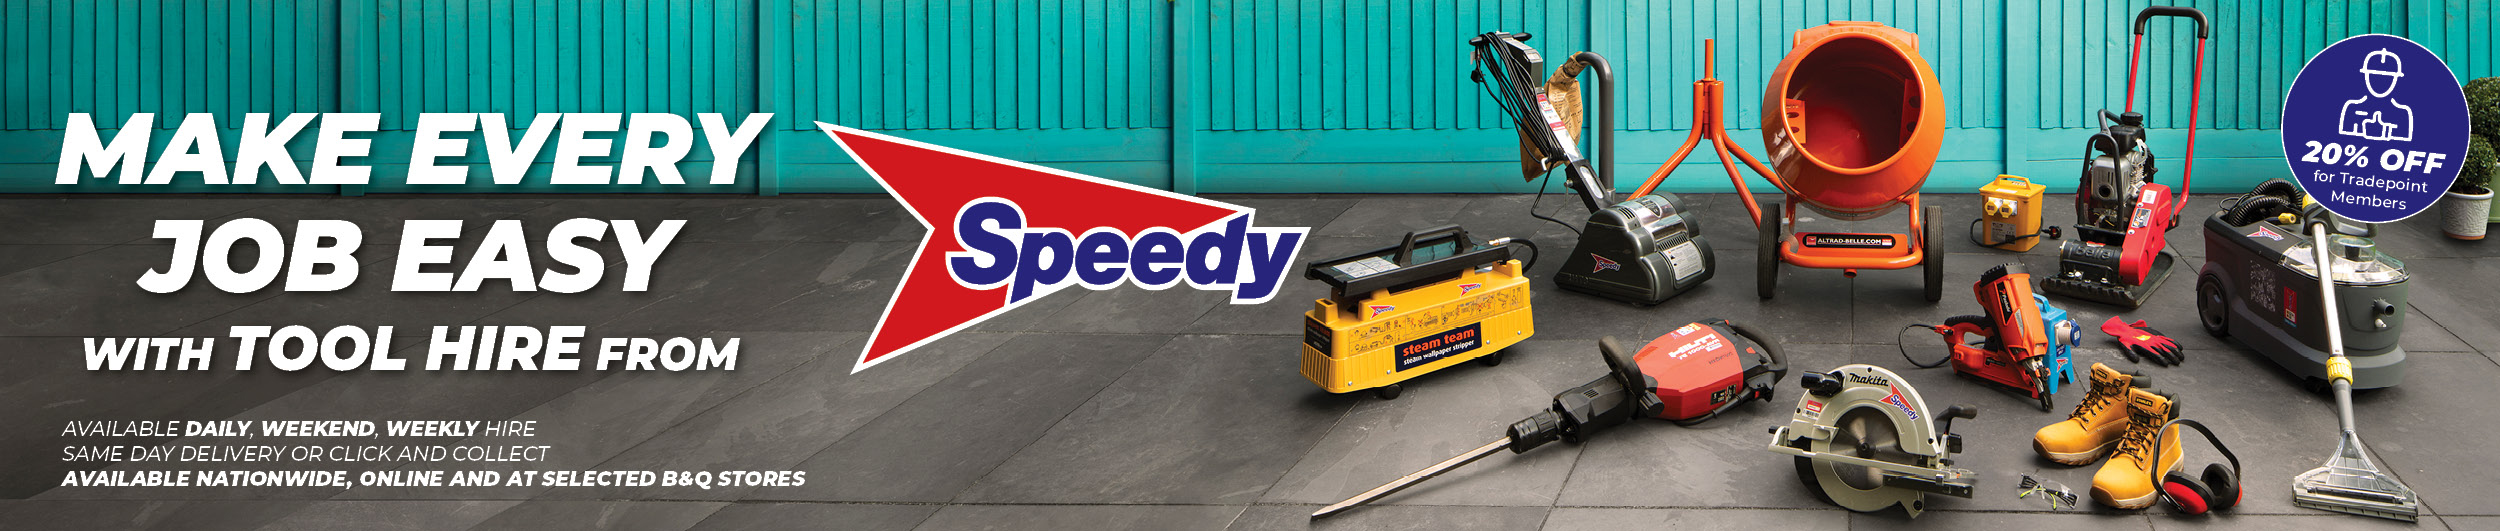 Make every job easy with tool hire from Speedy